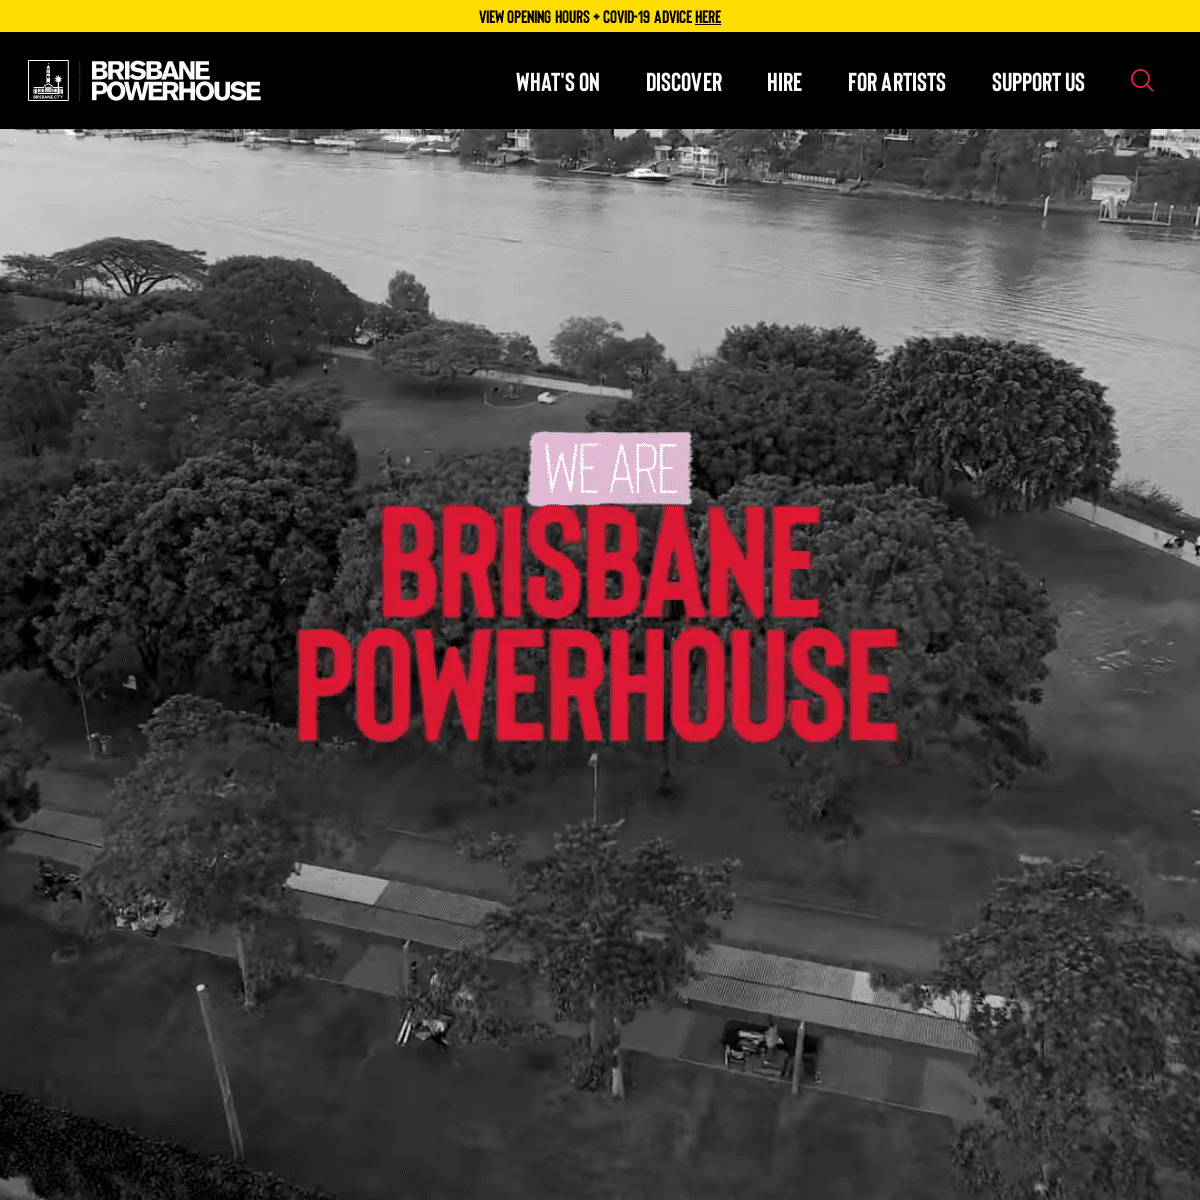 A complete backup of https://brisbanepowerhouse.org